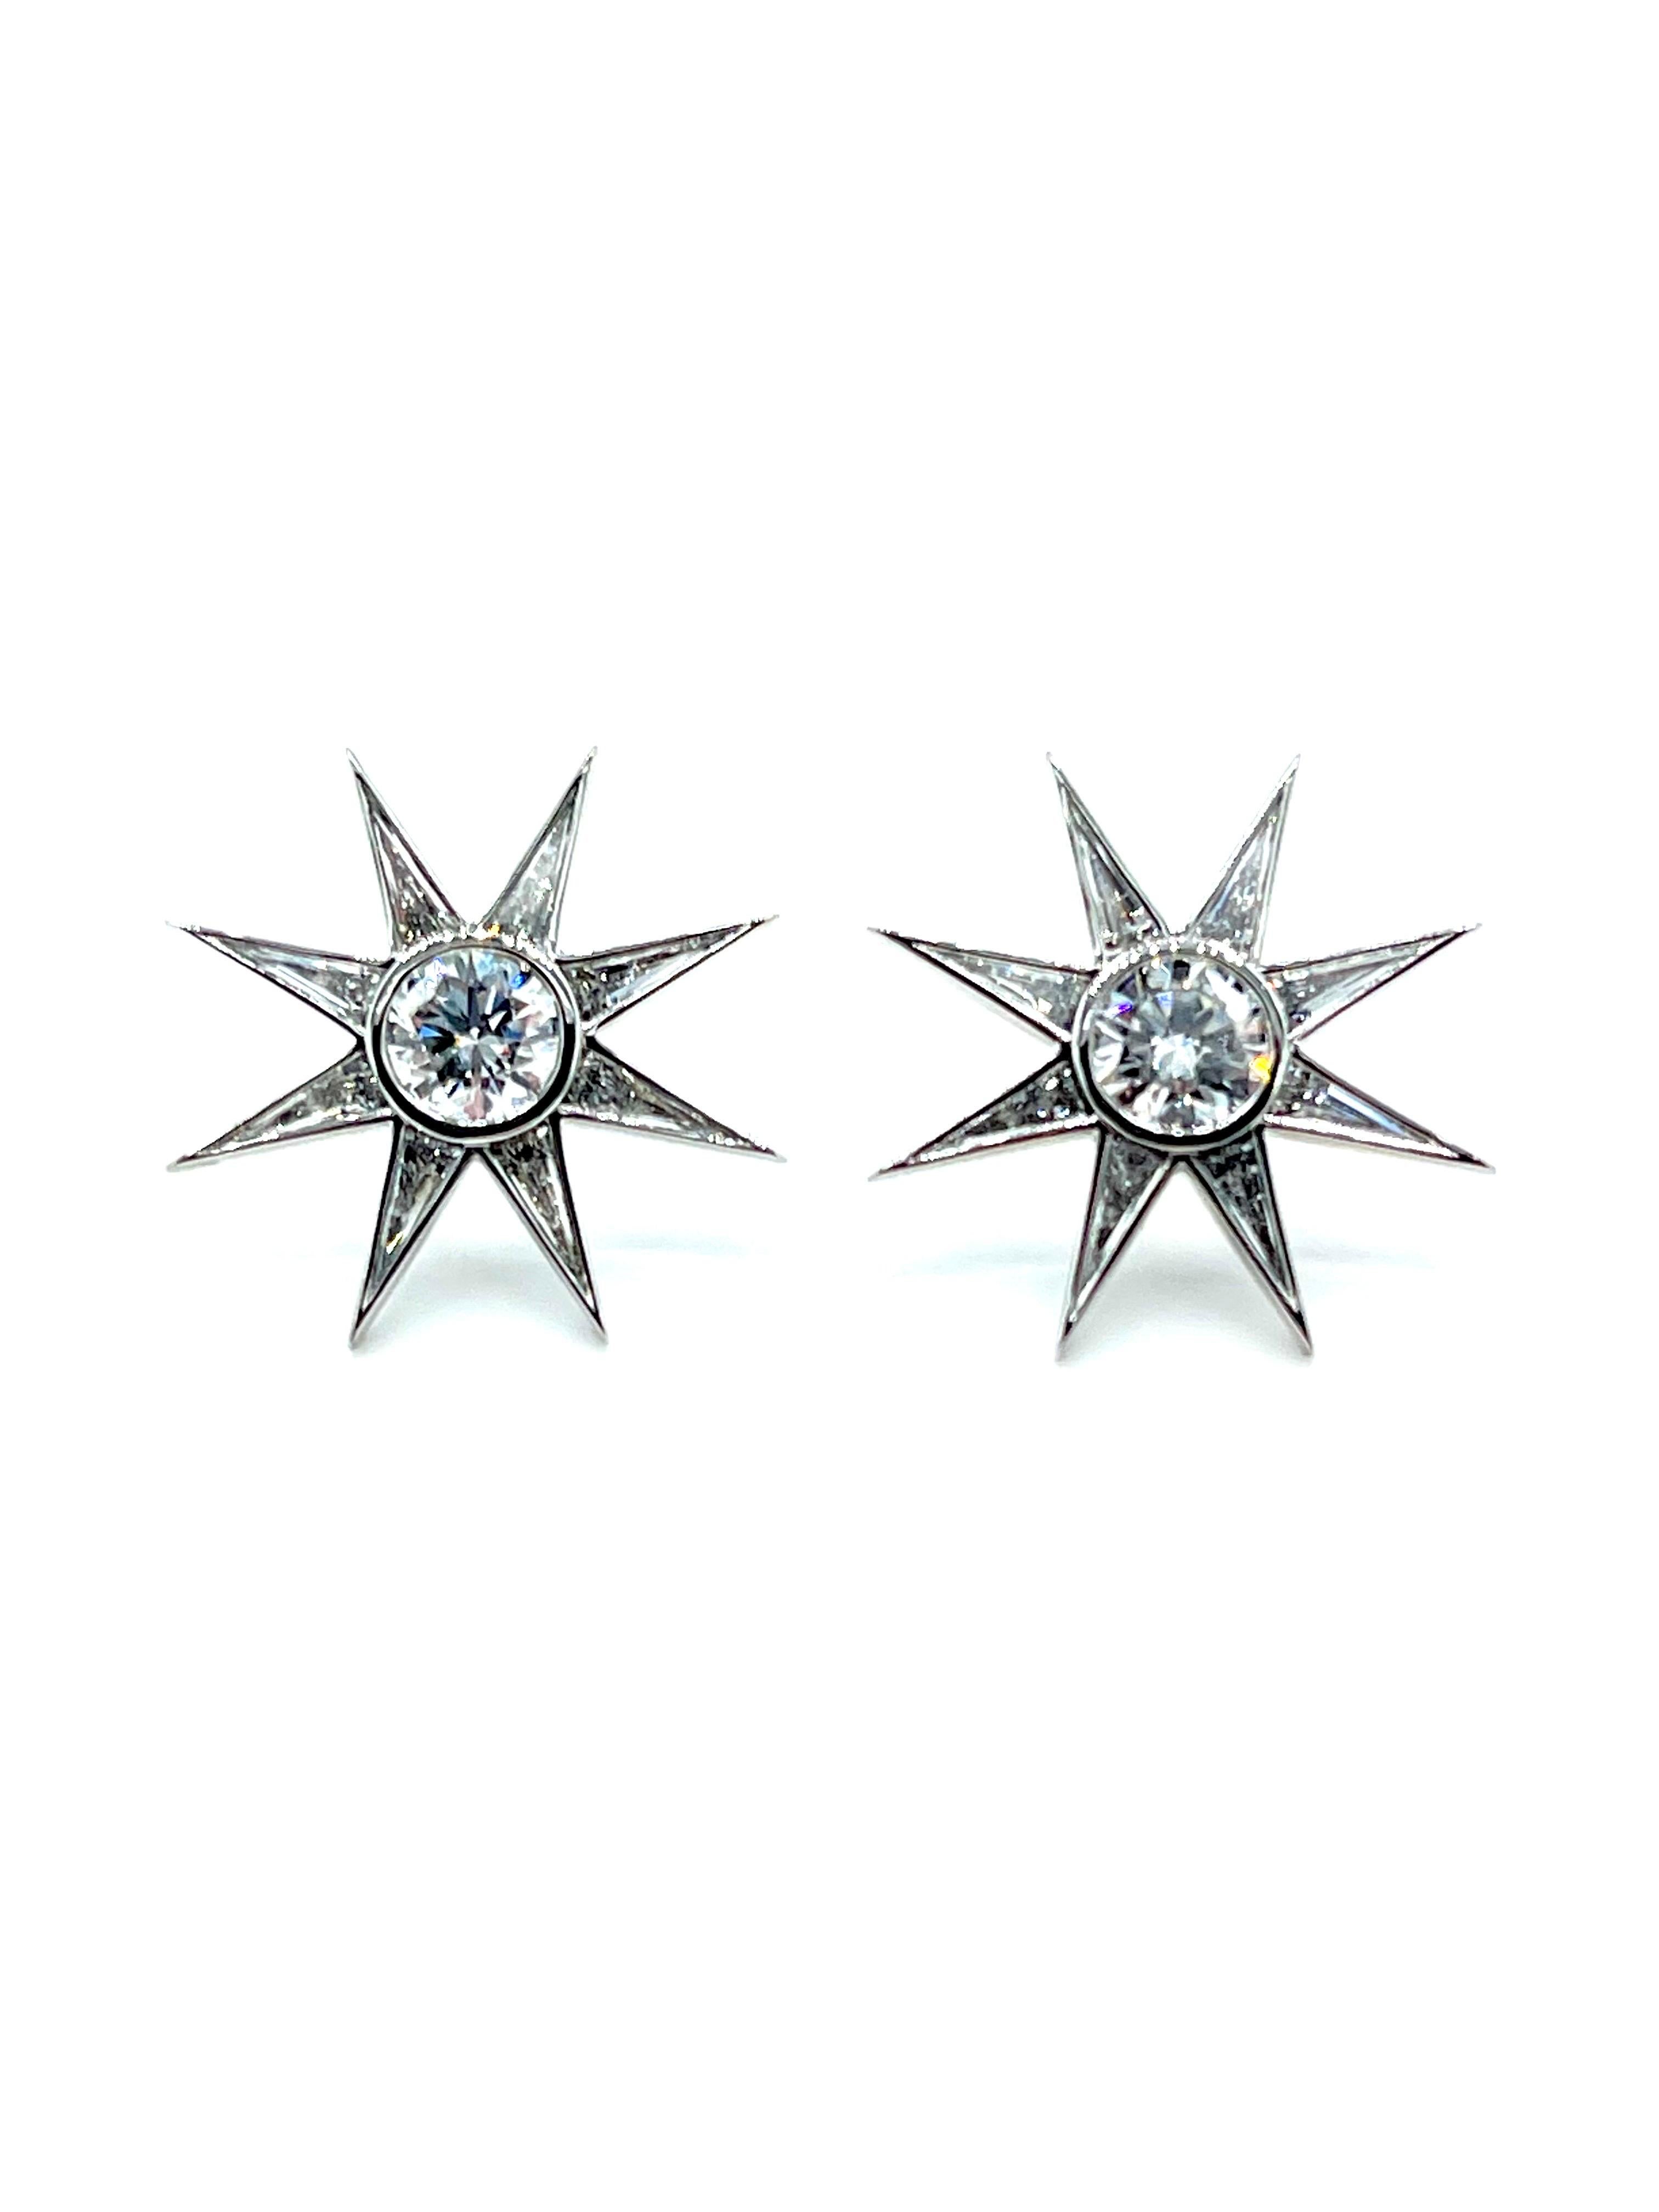 A beautiful pair of Diamond earring by designer Robert Procop!  The earrings feature a center round brilliant cut Diamond, surrounded by eight triangular cut Diamonds for a total weight of 1.57 carats.  The earrings are made in platinum, and have a